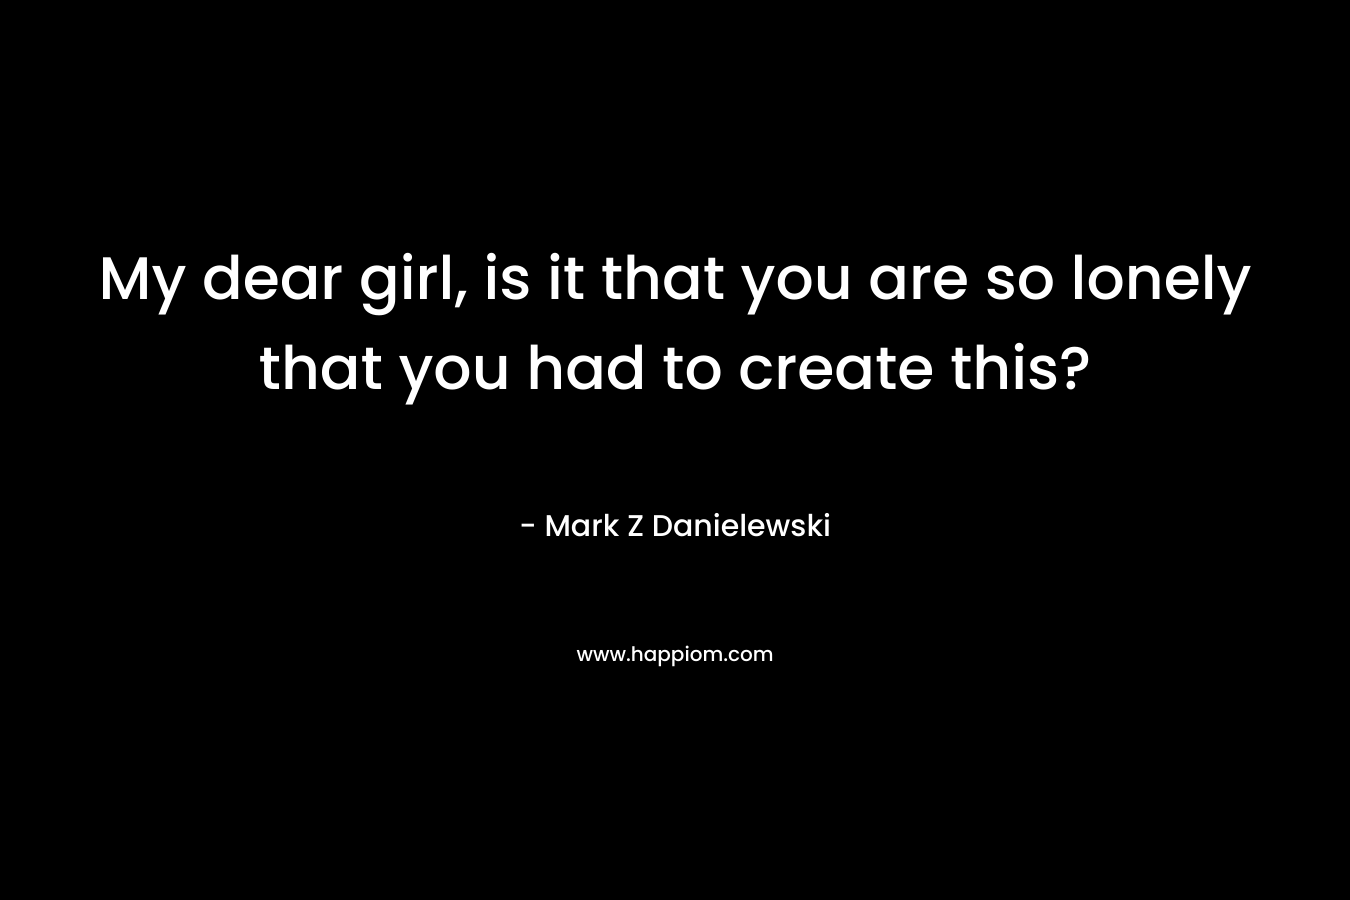 My dear girl, is it that you are so lonely that you had to create this? – Mark Z Danielewski